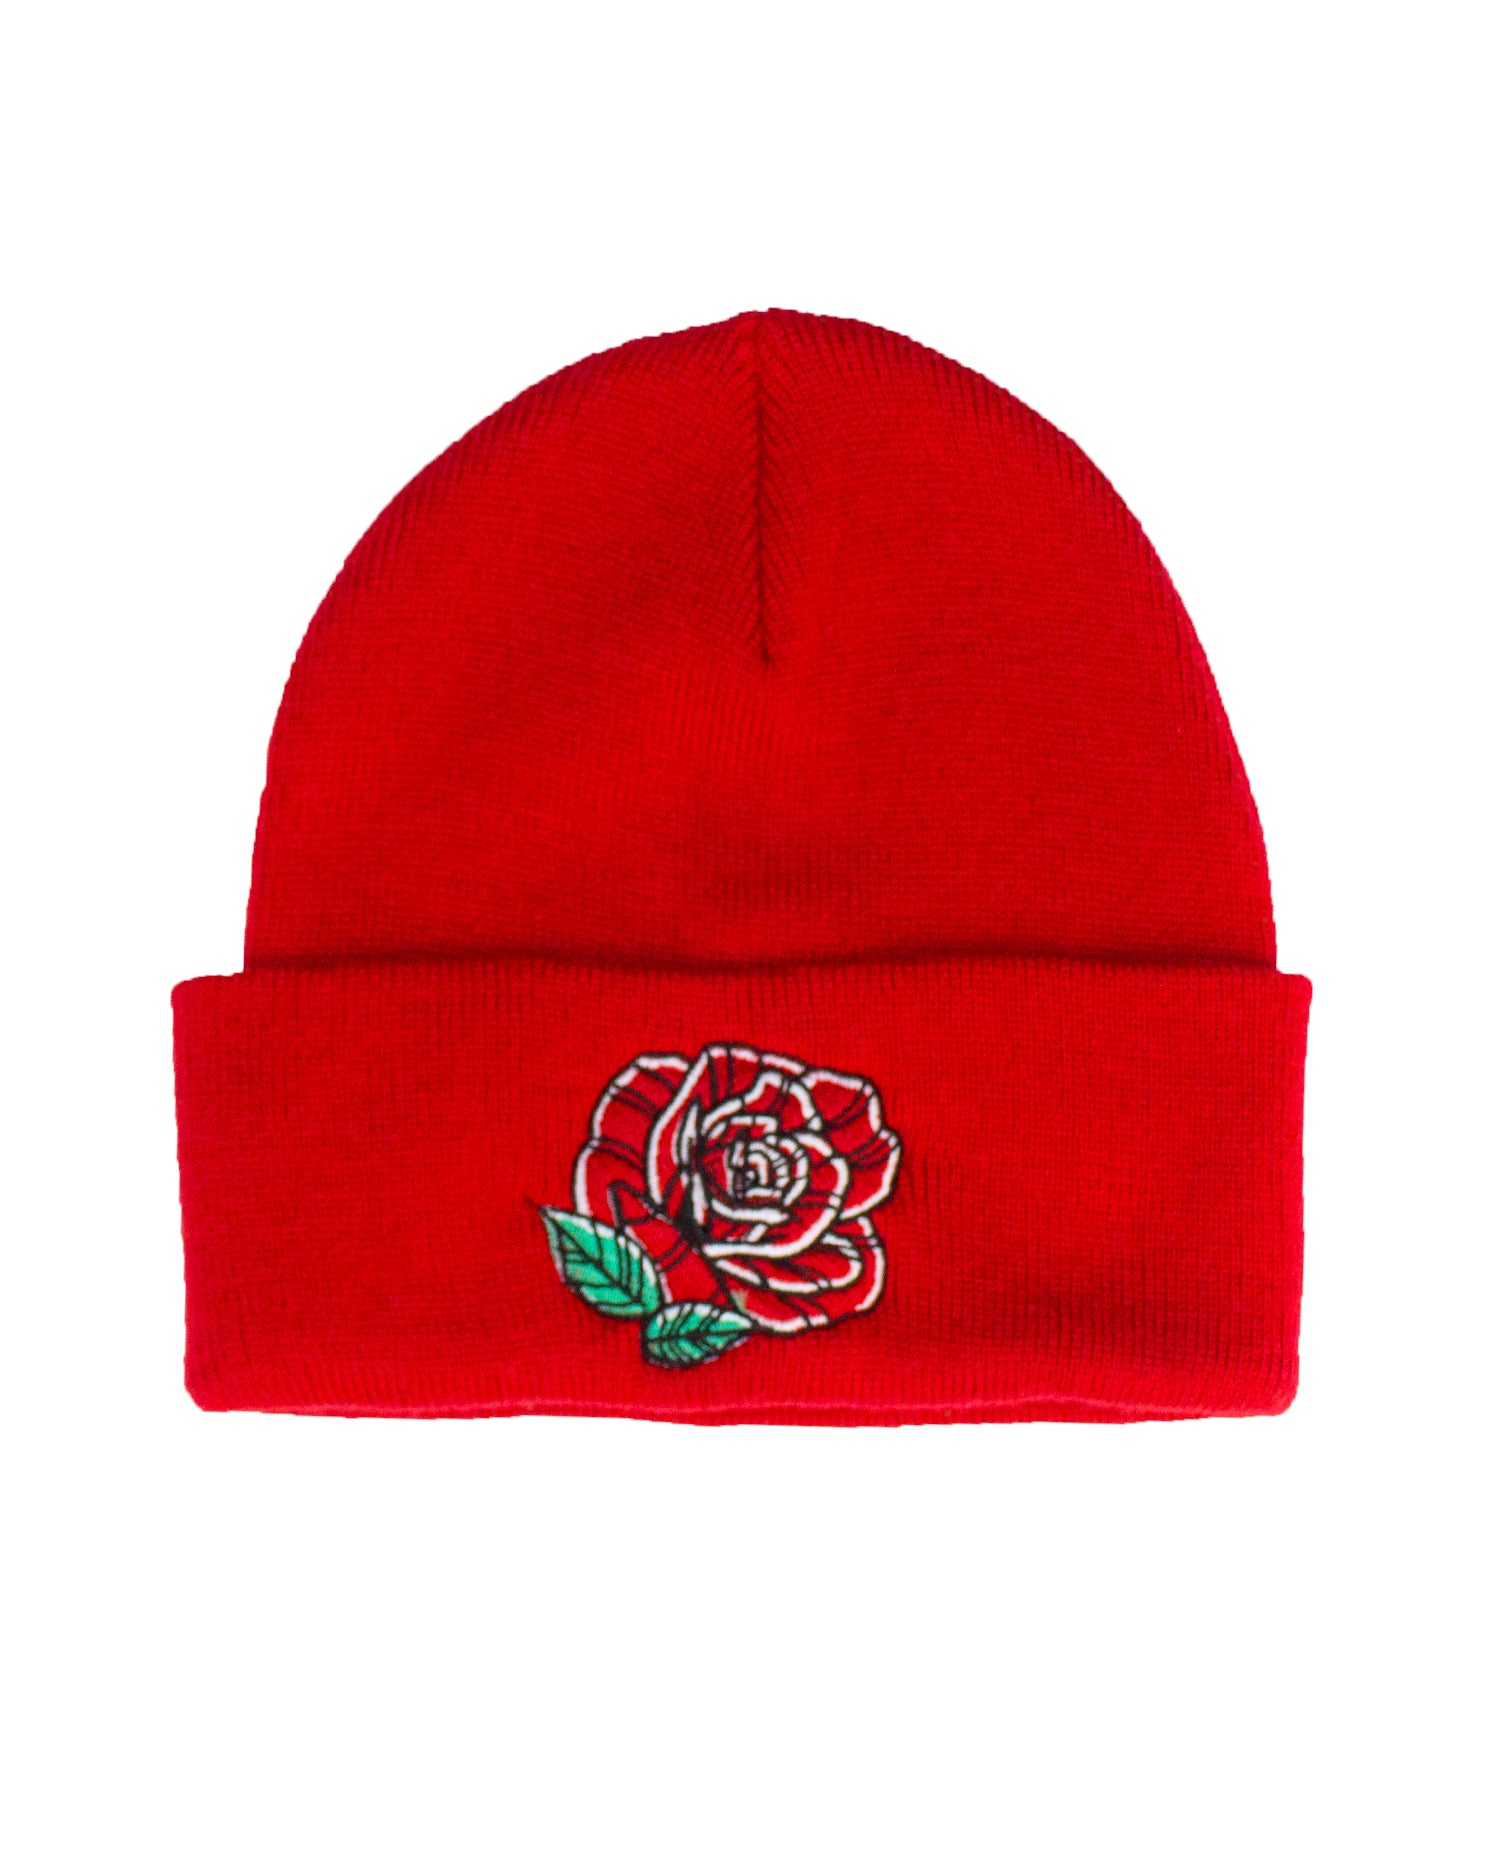 ROSE4YOU - Beanie - Red